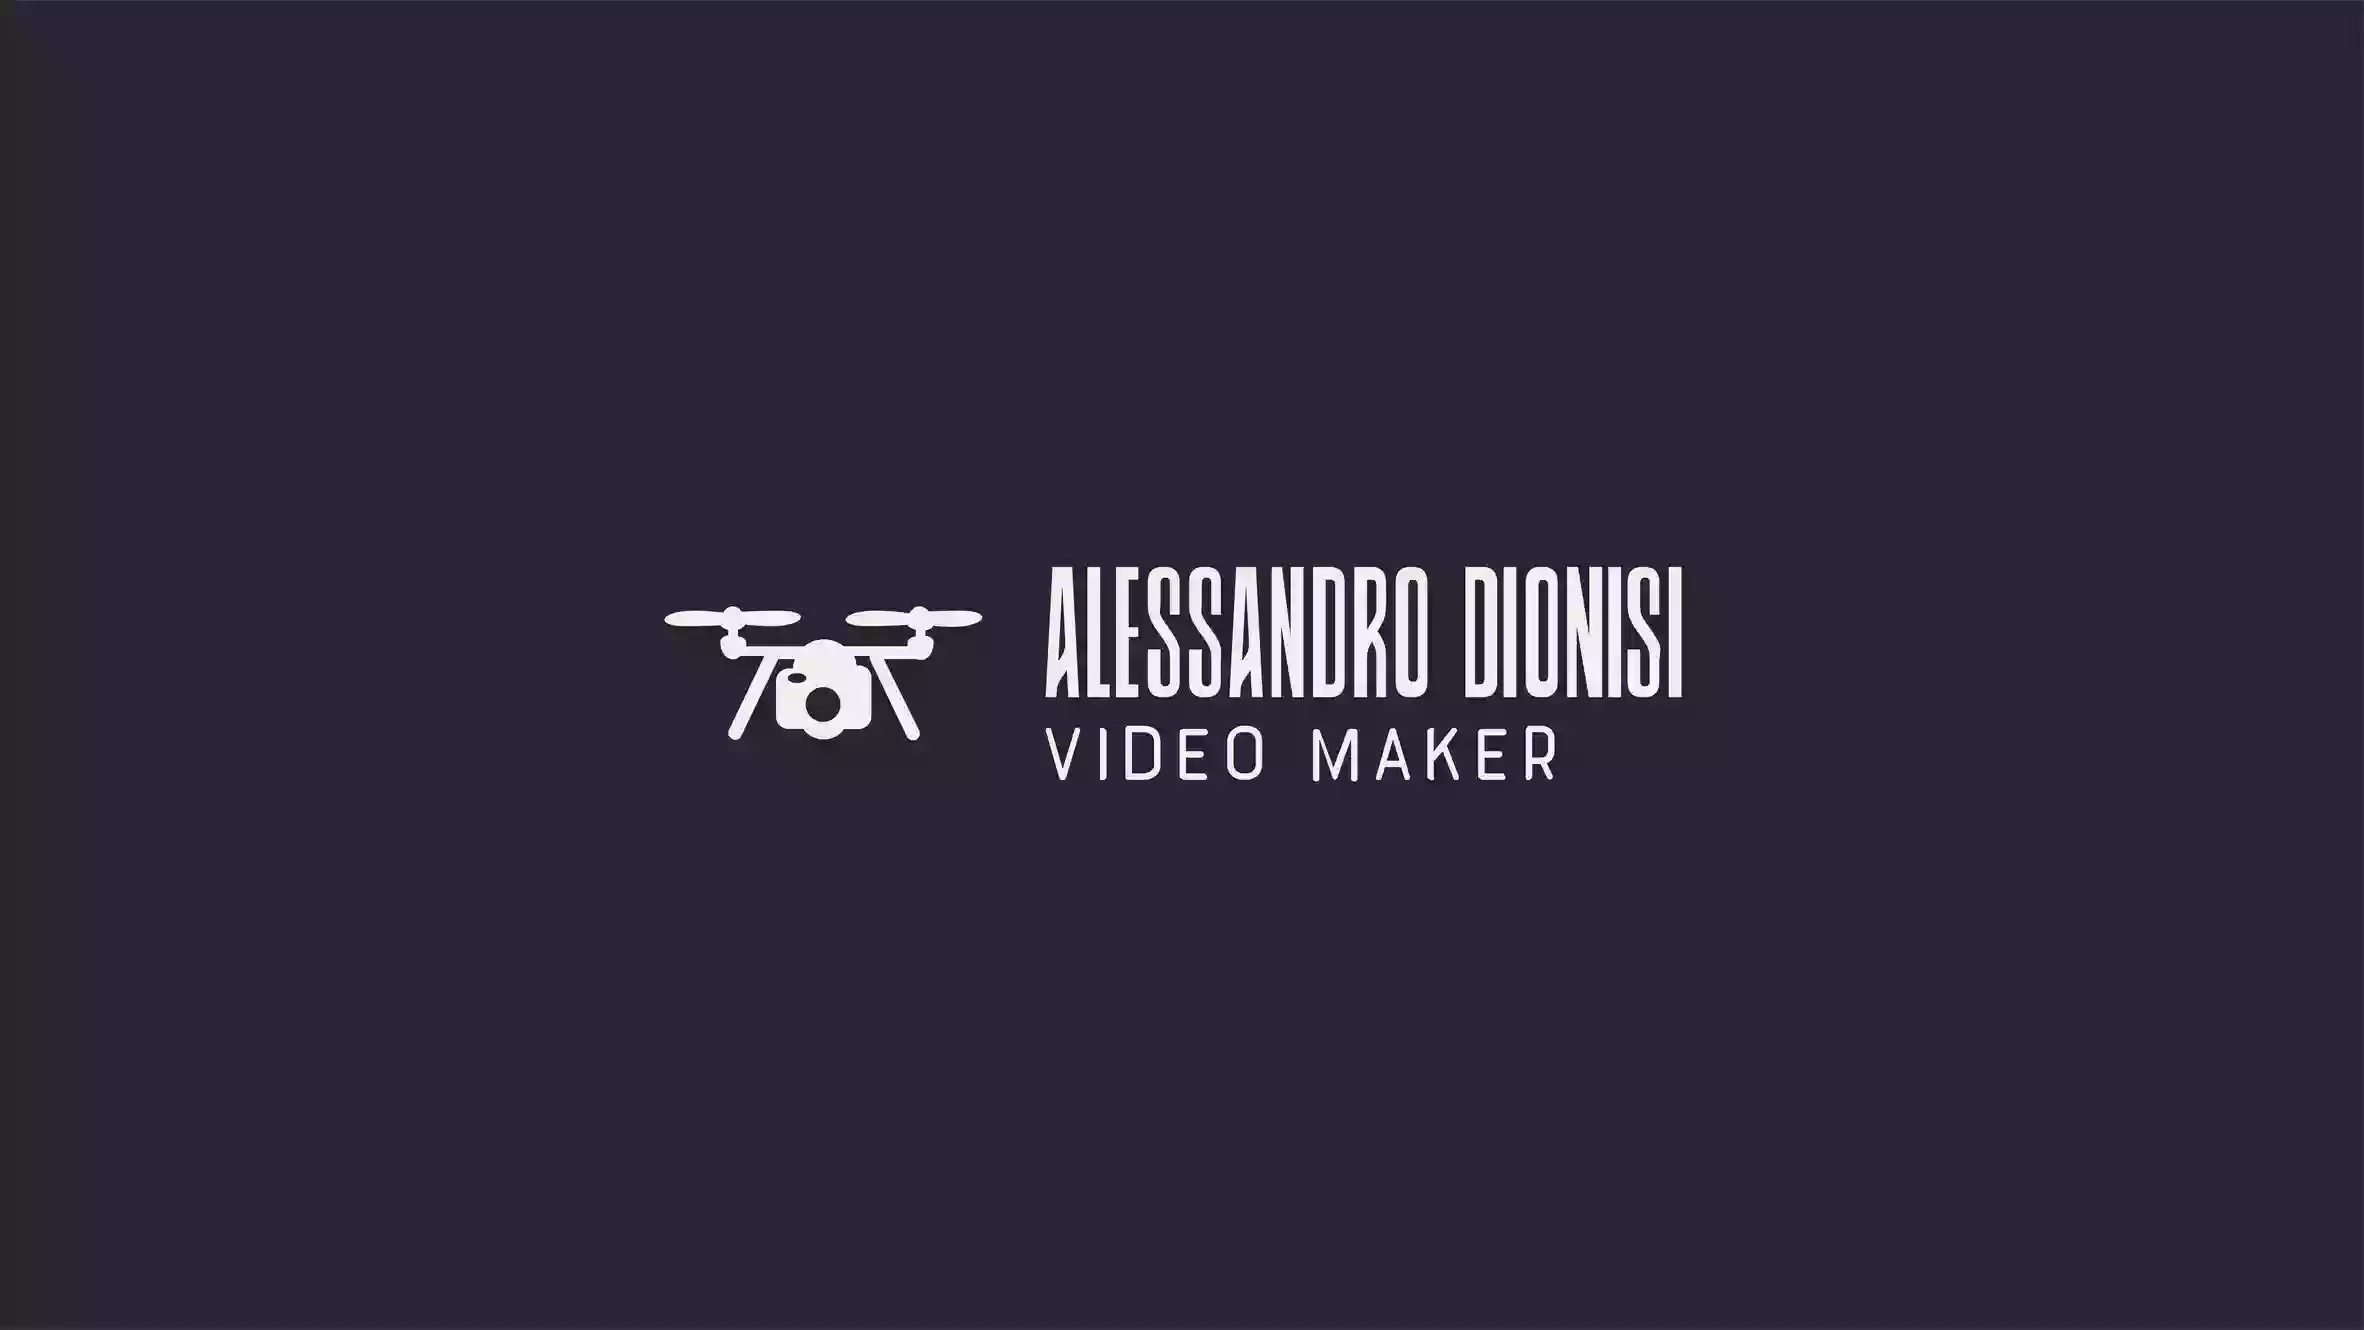 Alessandro Dionisi Videomaker